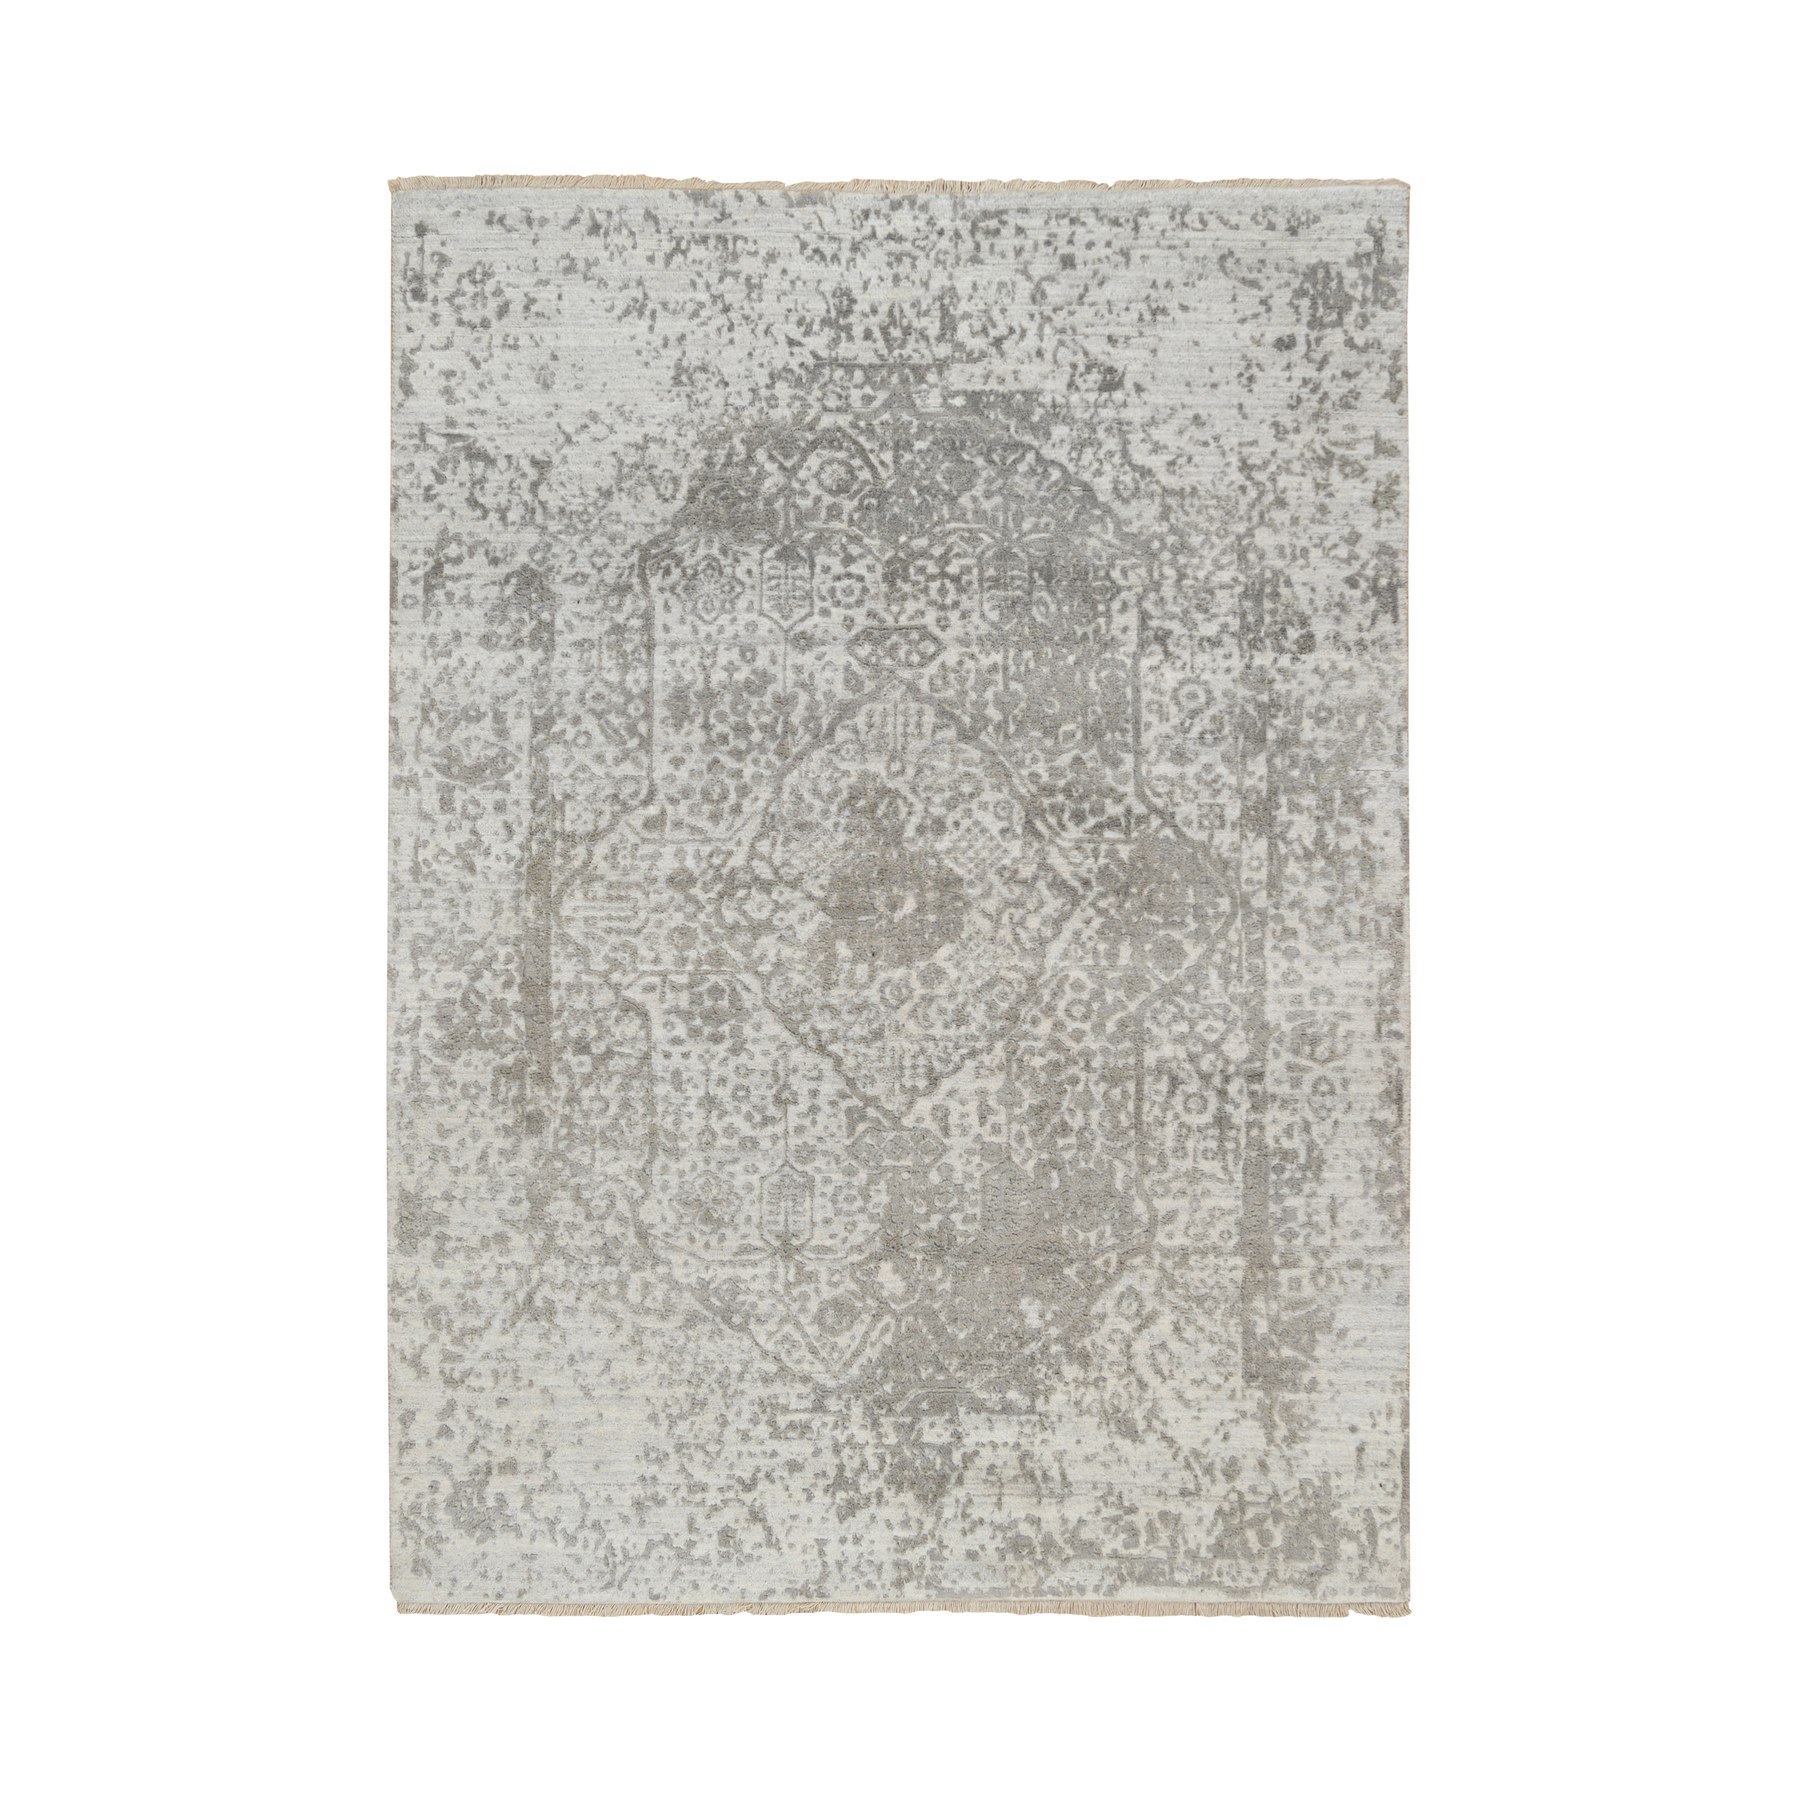  Silk Hand-Knotted Area Rug 5'1